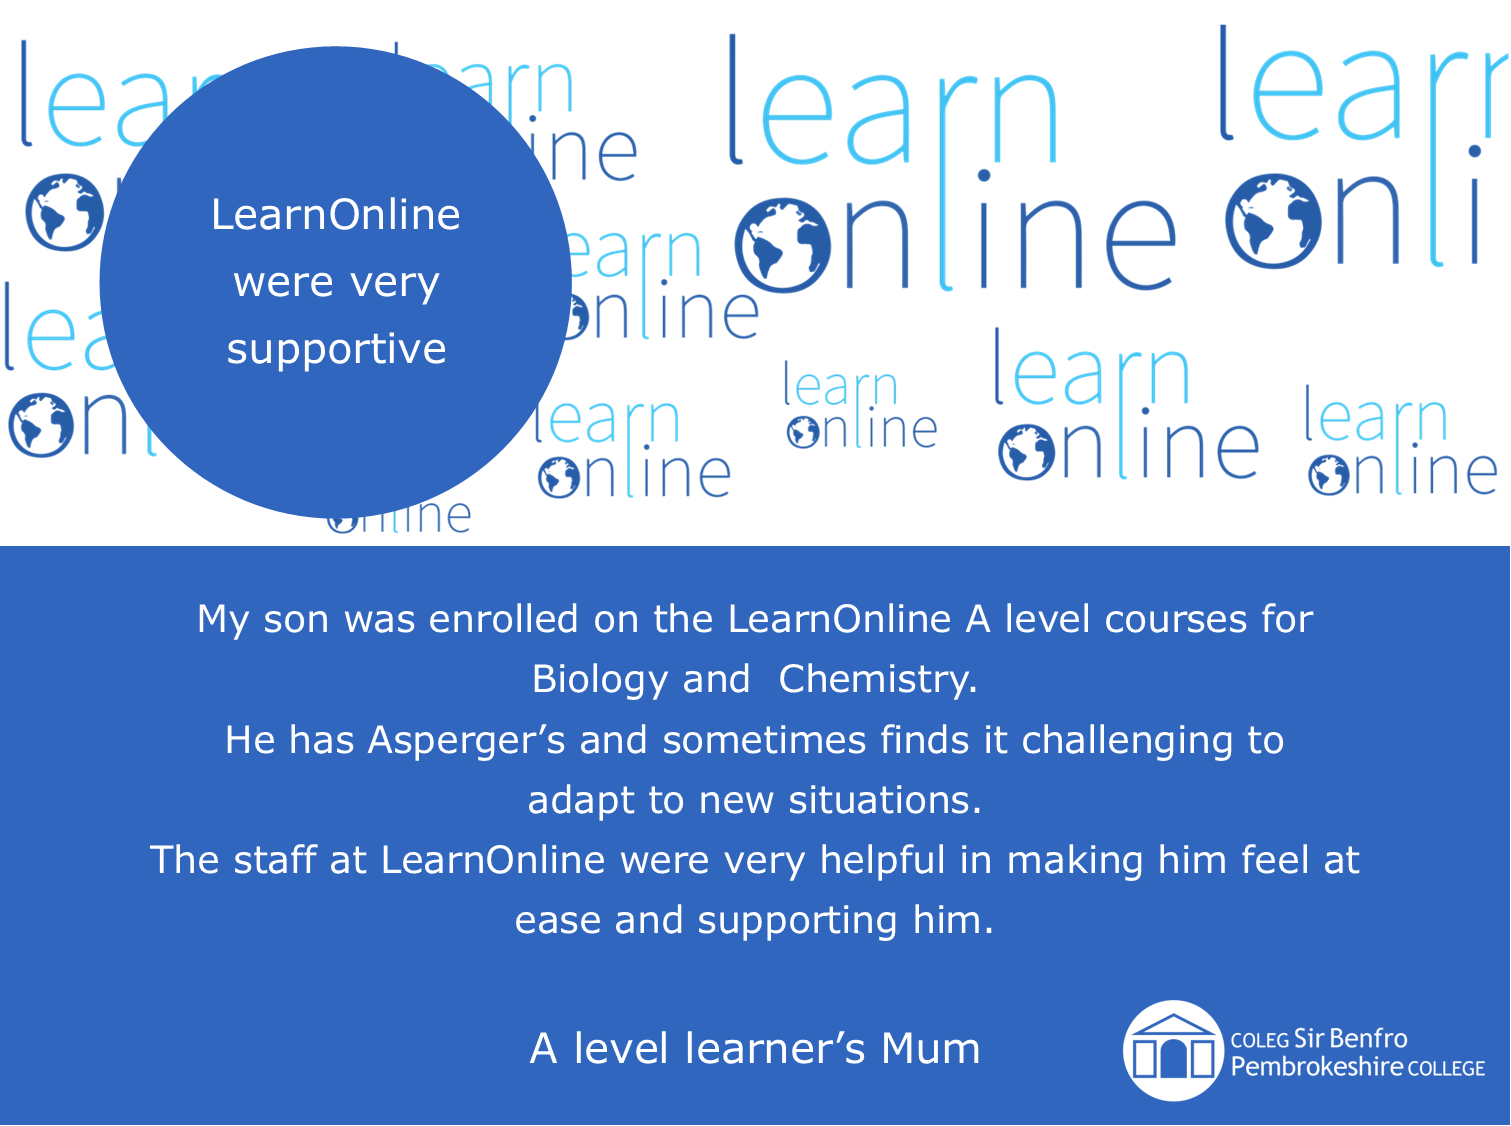 LearnOnline testimonial 'LearnOnline were very supportive' My son was enrolled on the LearnOnline A level courses for Biology and Chemistry. He has Asperger’s and sometimes finds it challenging to adapt to new situations. The staff at LearnOnline were very helpful in making him feel at ease and supporting him. A level learner’s Mum